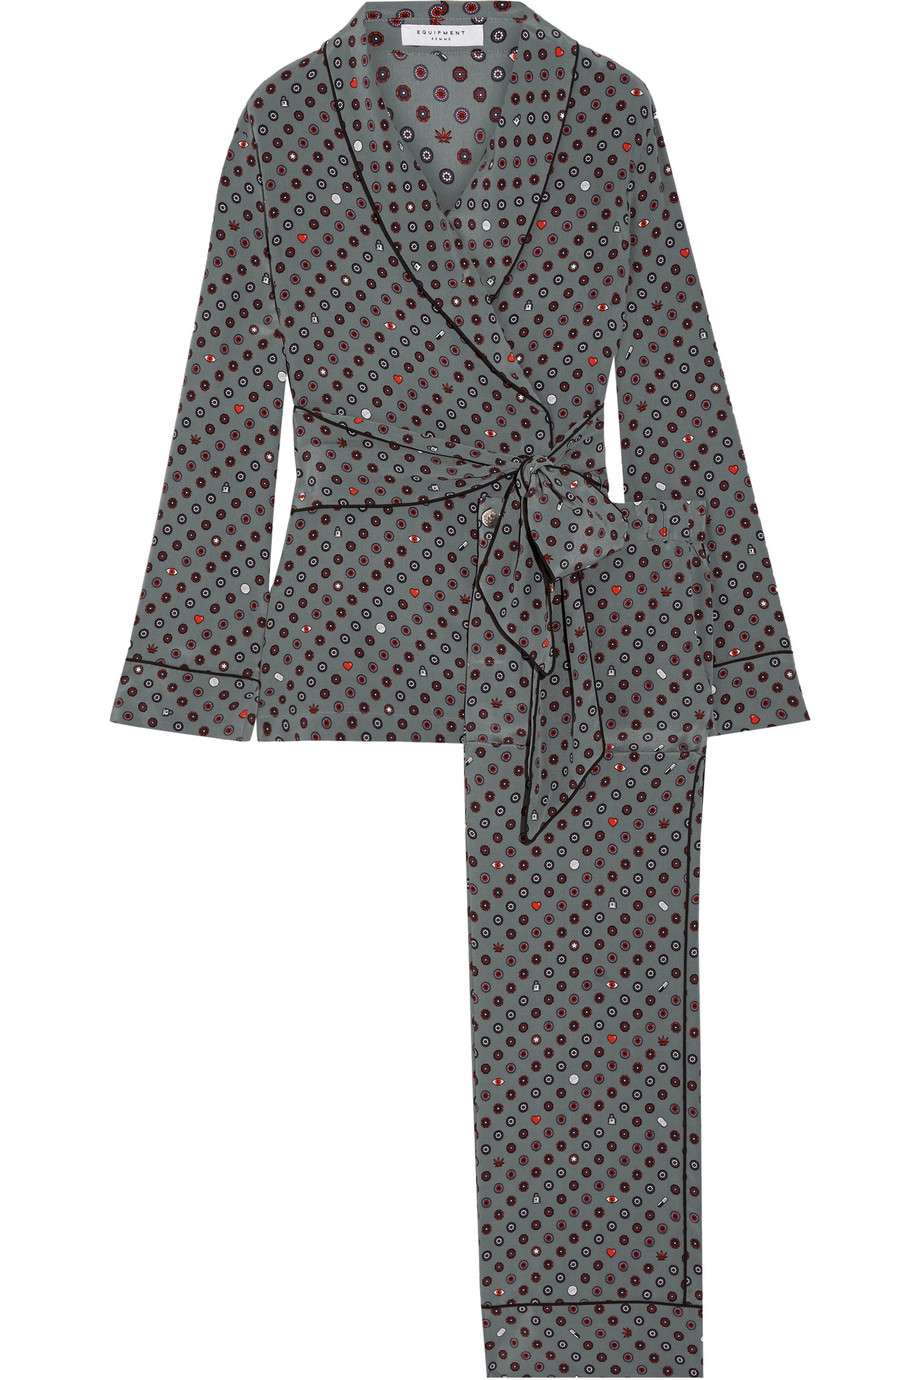 Gorgeous PJ Sets Worth Investing In | InStyle